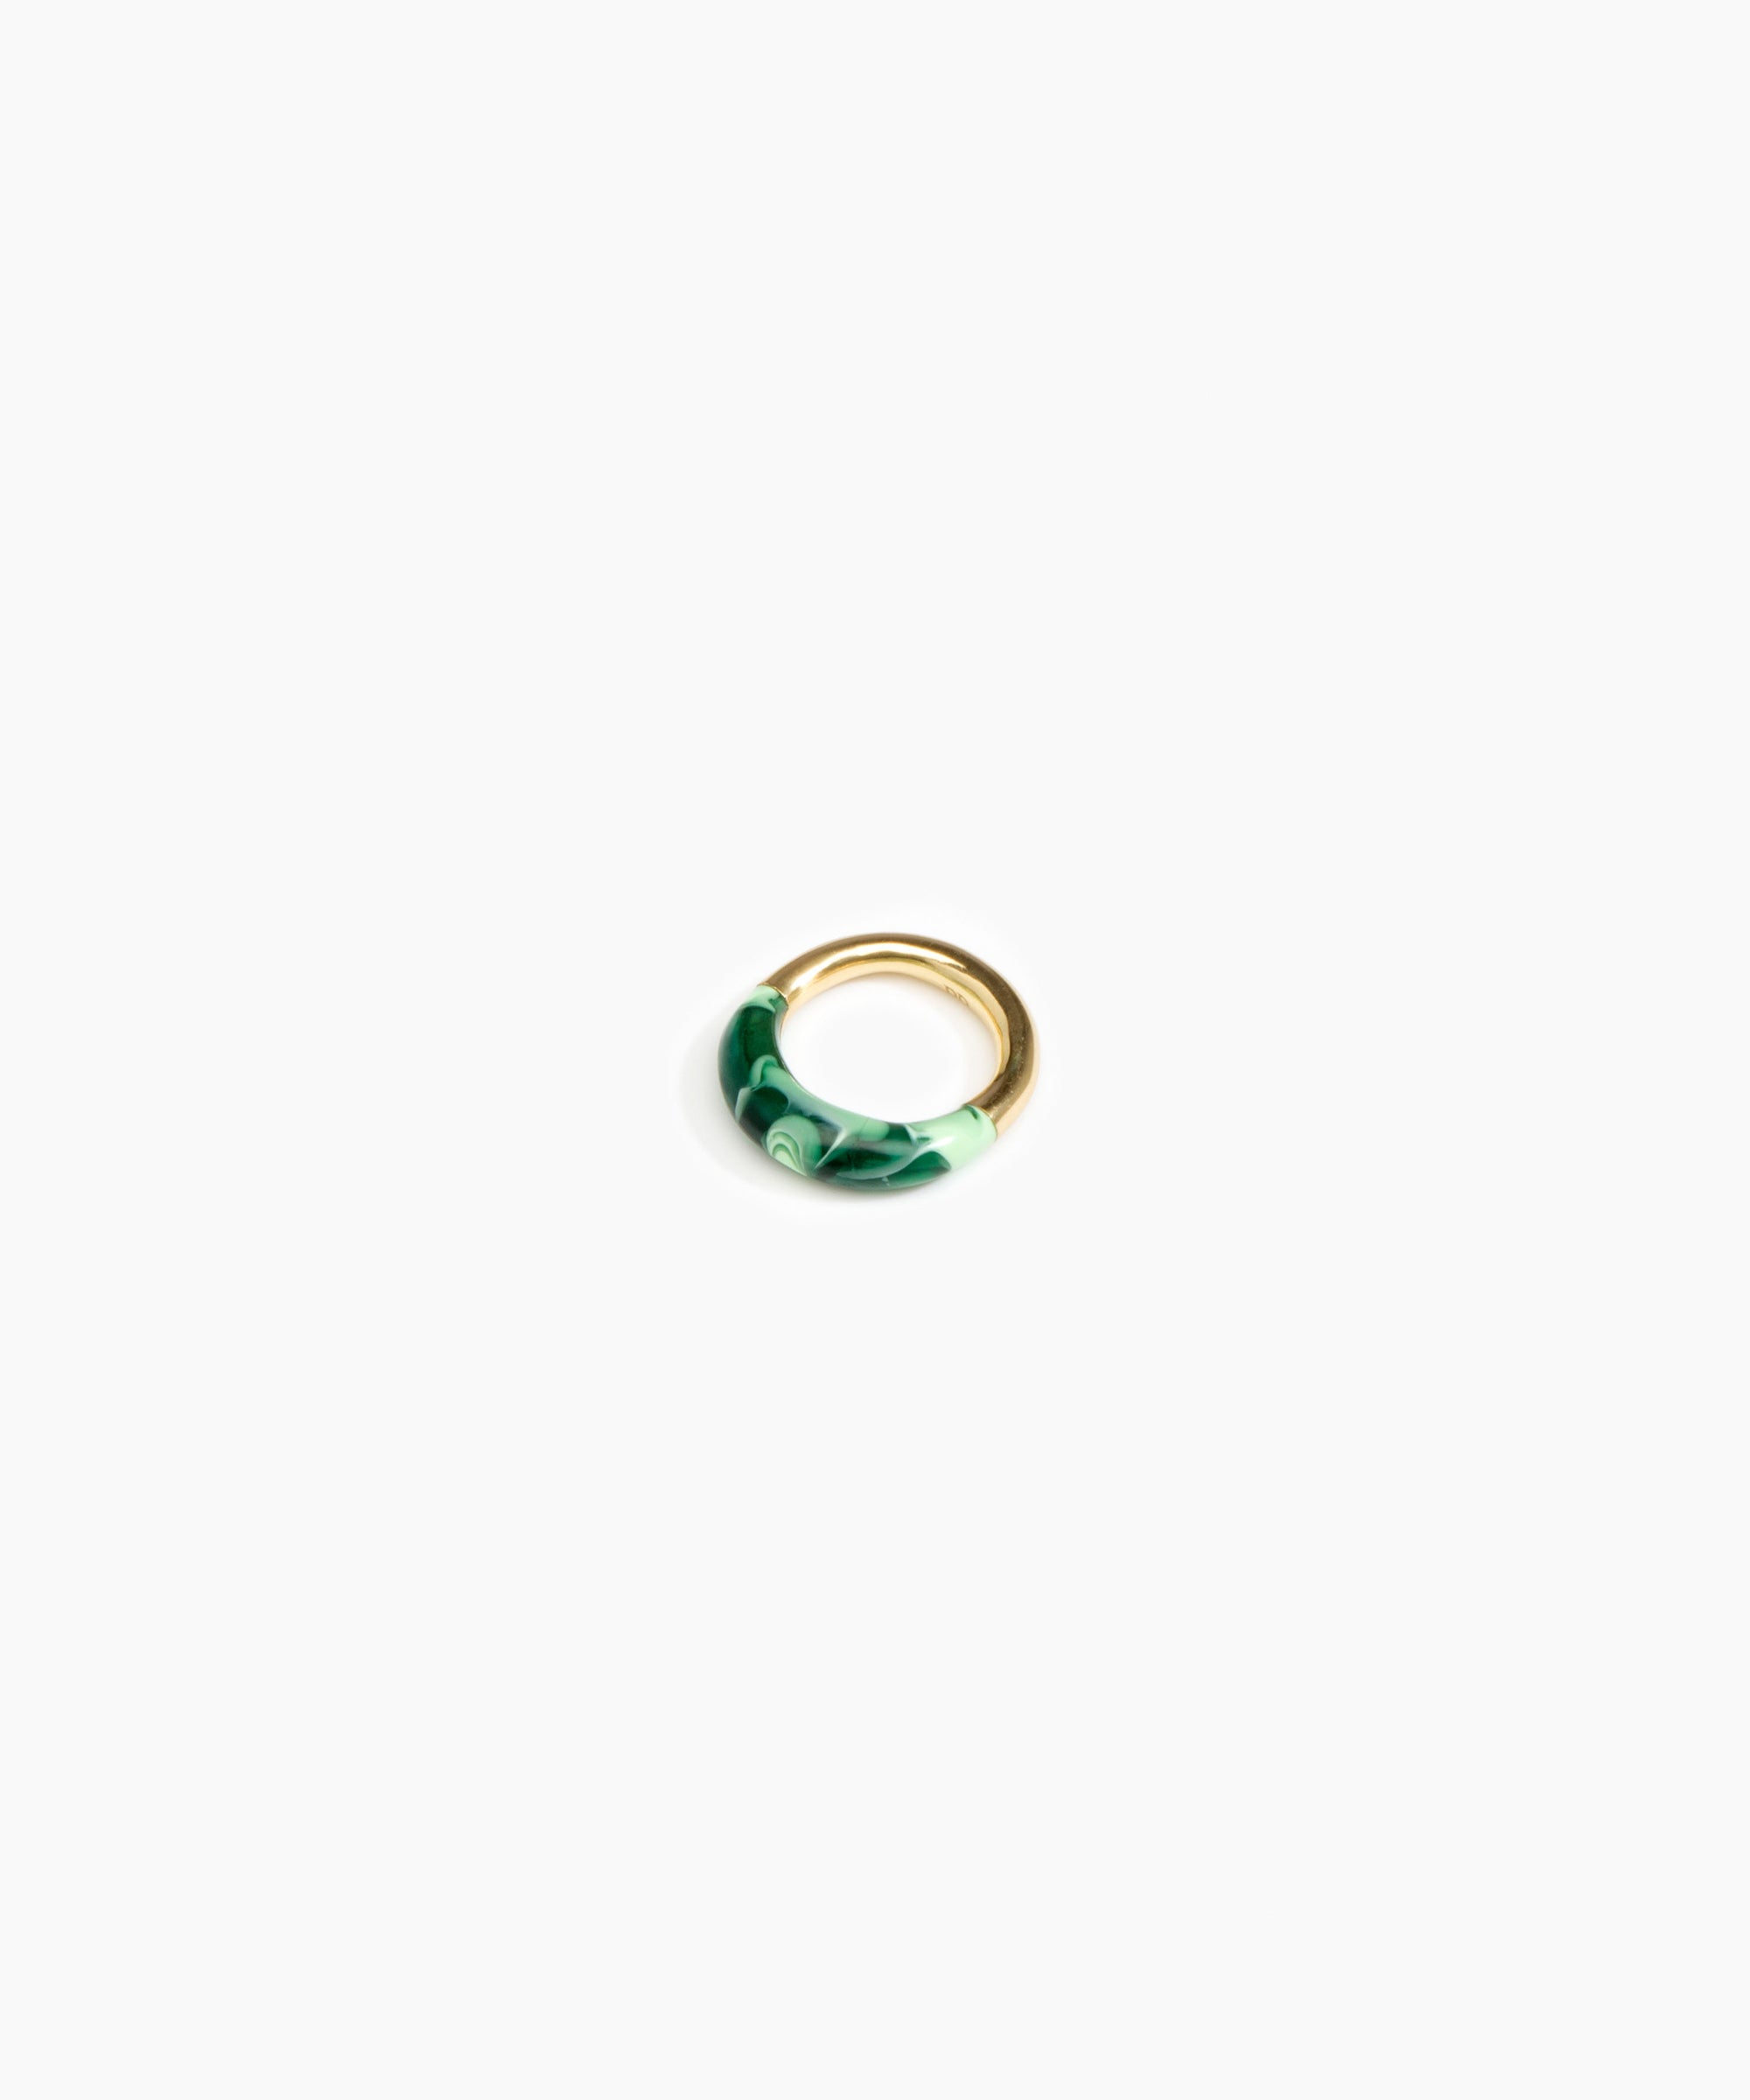 Dinosaur Designs Small Horn Ring Rings in Moss color resin with Nano-Coated Brass Material